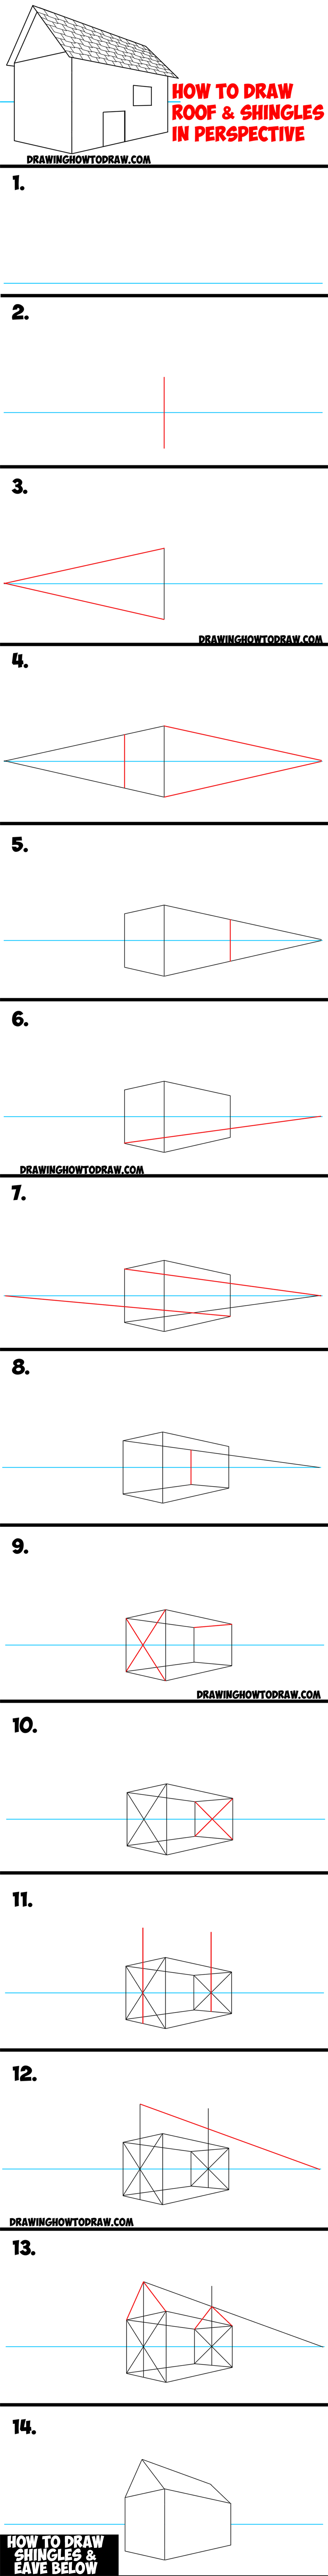 How to Draw a Roof and Shingles with Two Point Perspective - Easy Step by Step Drawing Tutorial